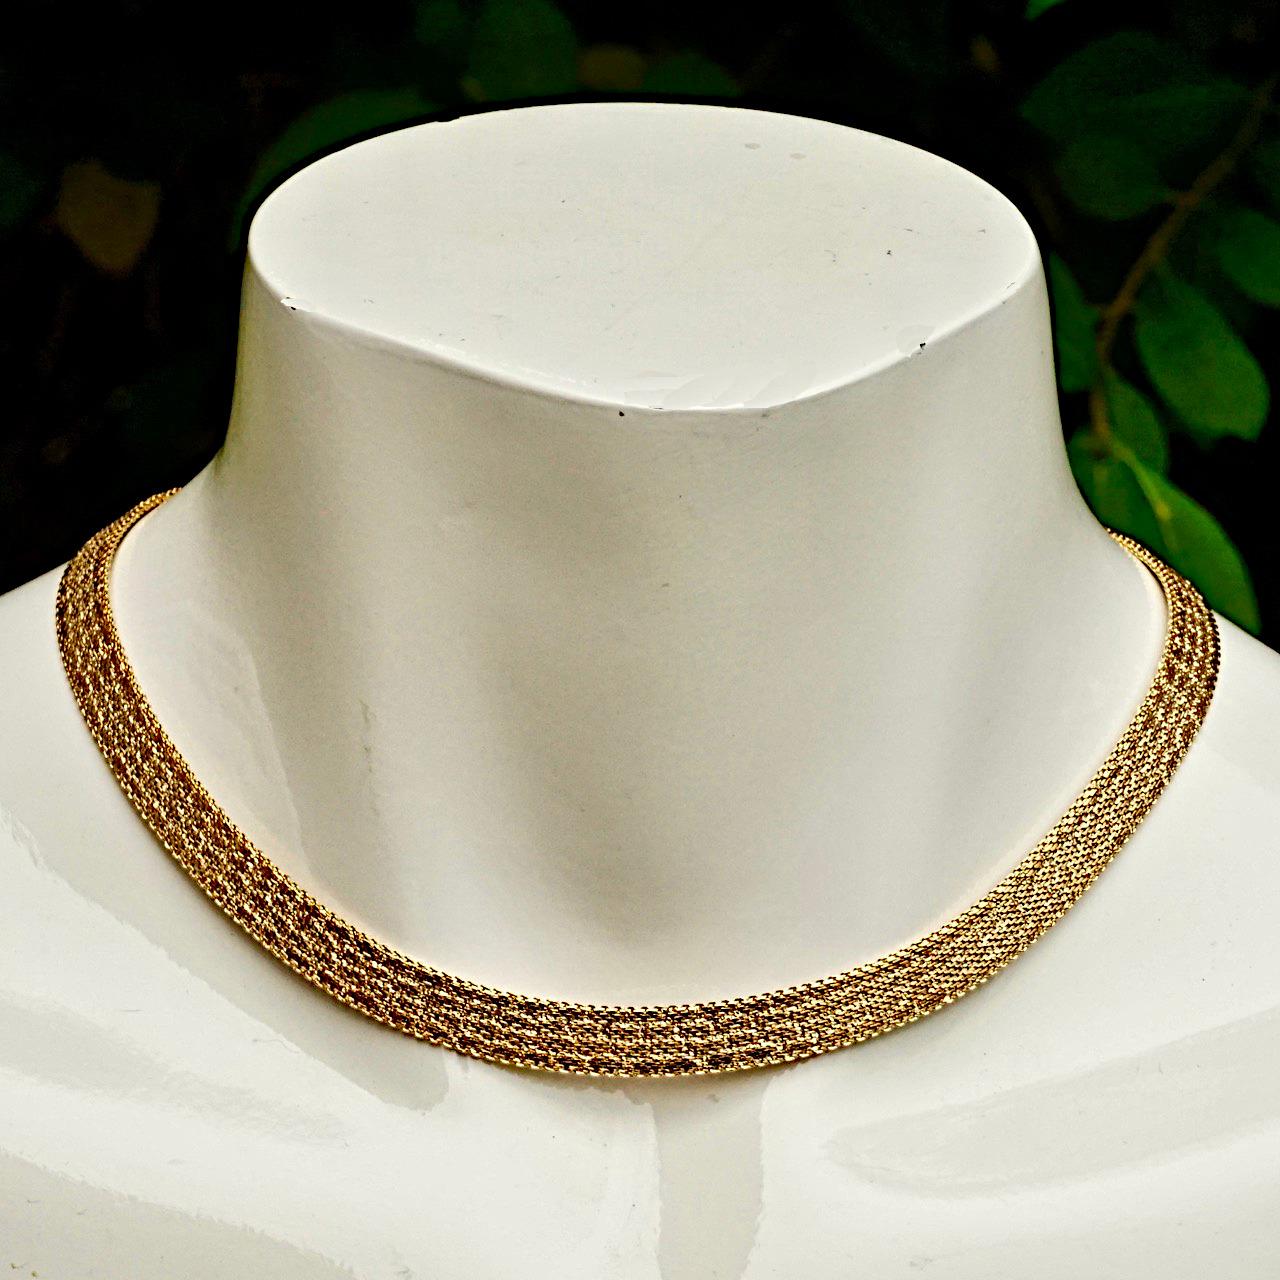 Beautiful bright gold plated mesh necklace, featuring a lovely textured design, and safety chain. Measuring length approximately 39.6cm / 15.6 inches by width 8 mm / .3 inch. The necklace is in very good condition, as new.

This is a stylish collar